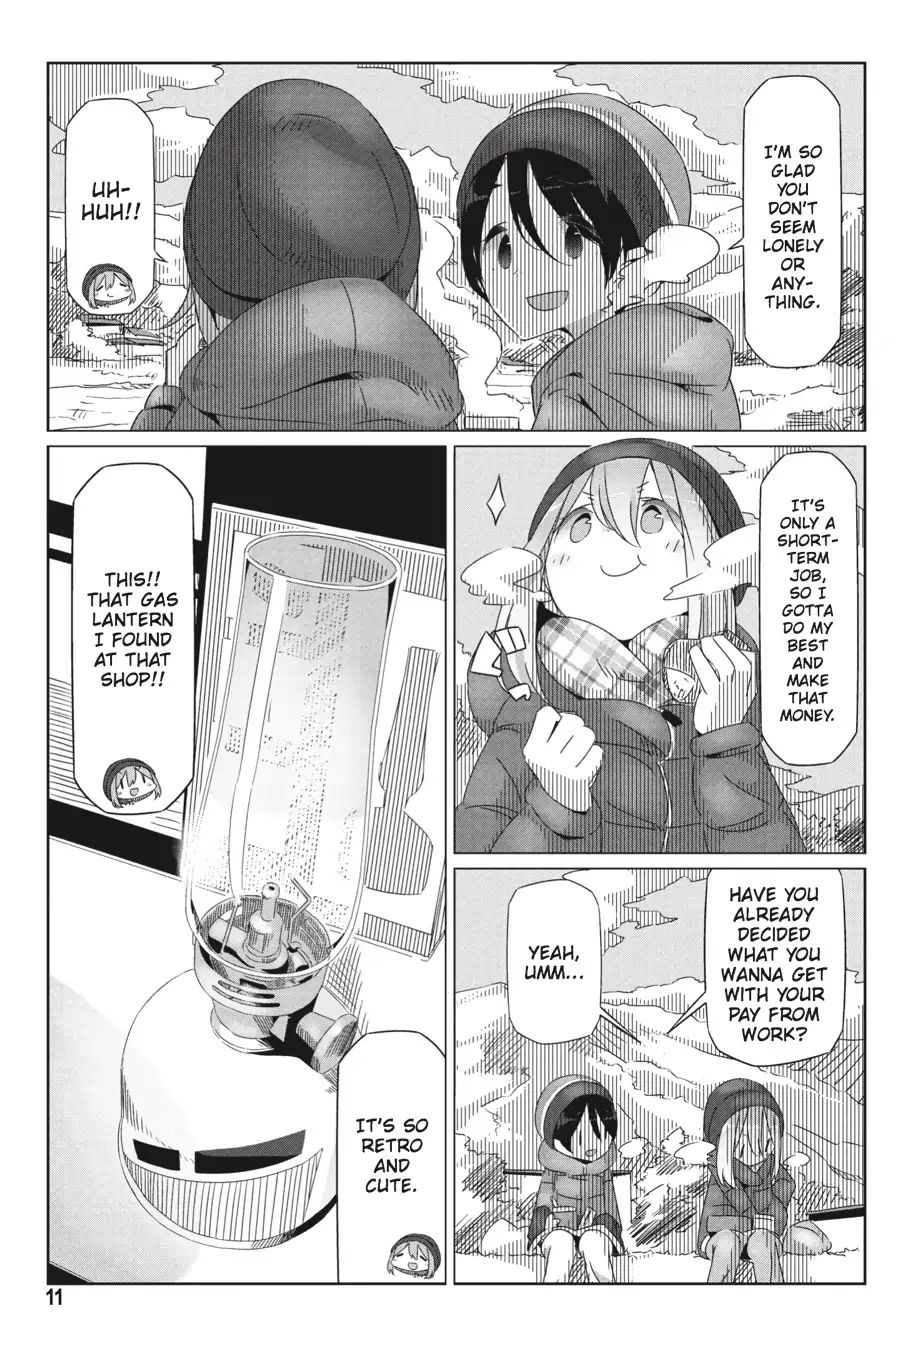 Yurucamp Vol.5 Chapter 24: December Work and Everyone's Day Off